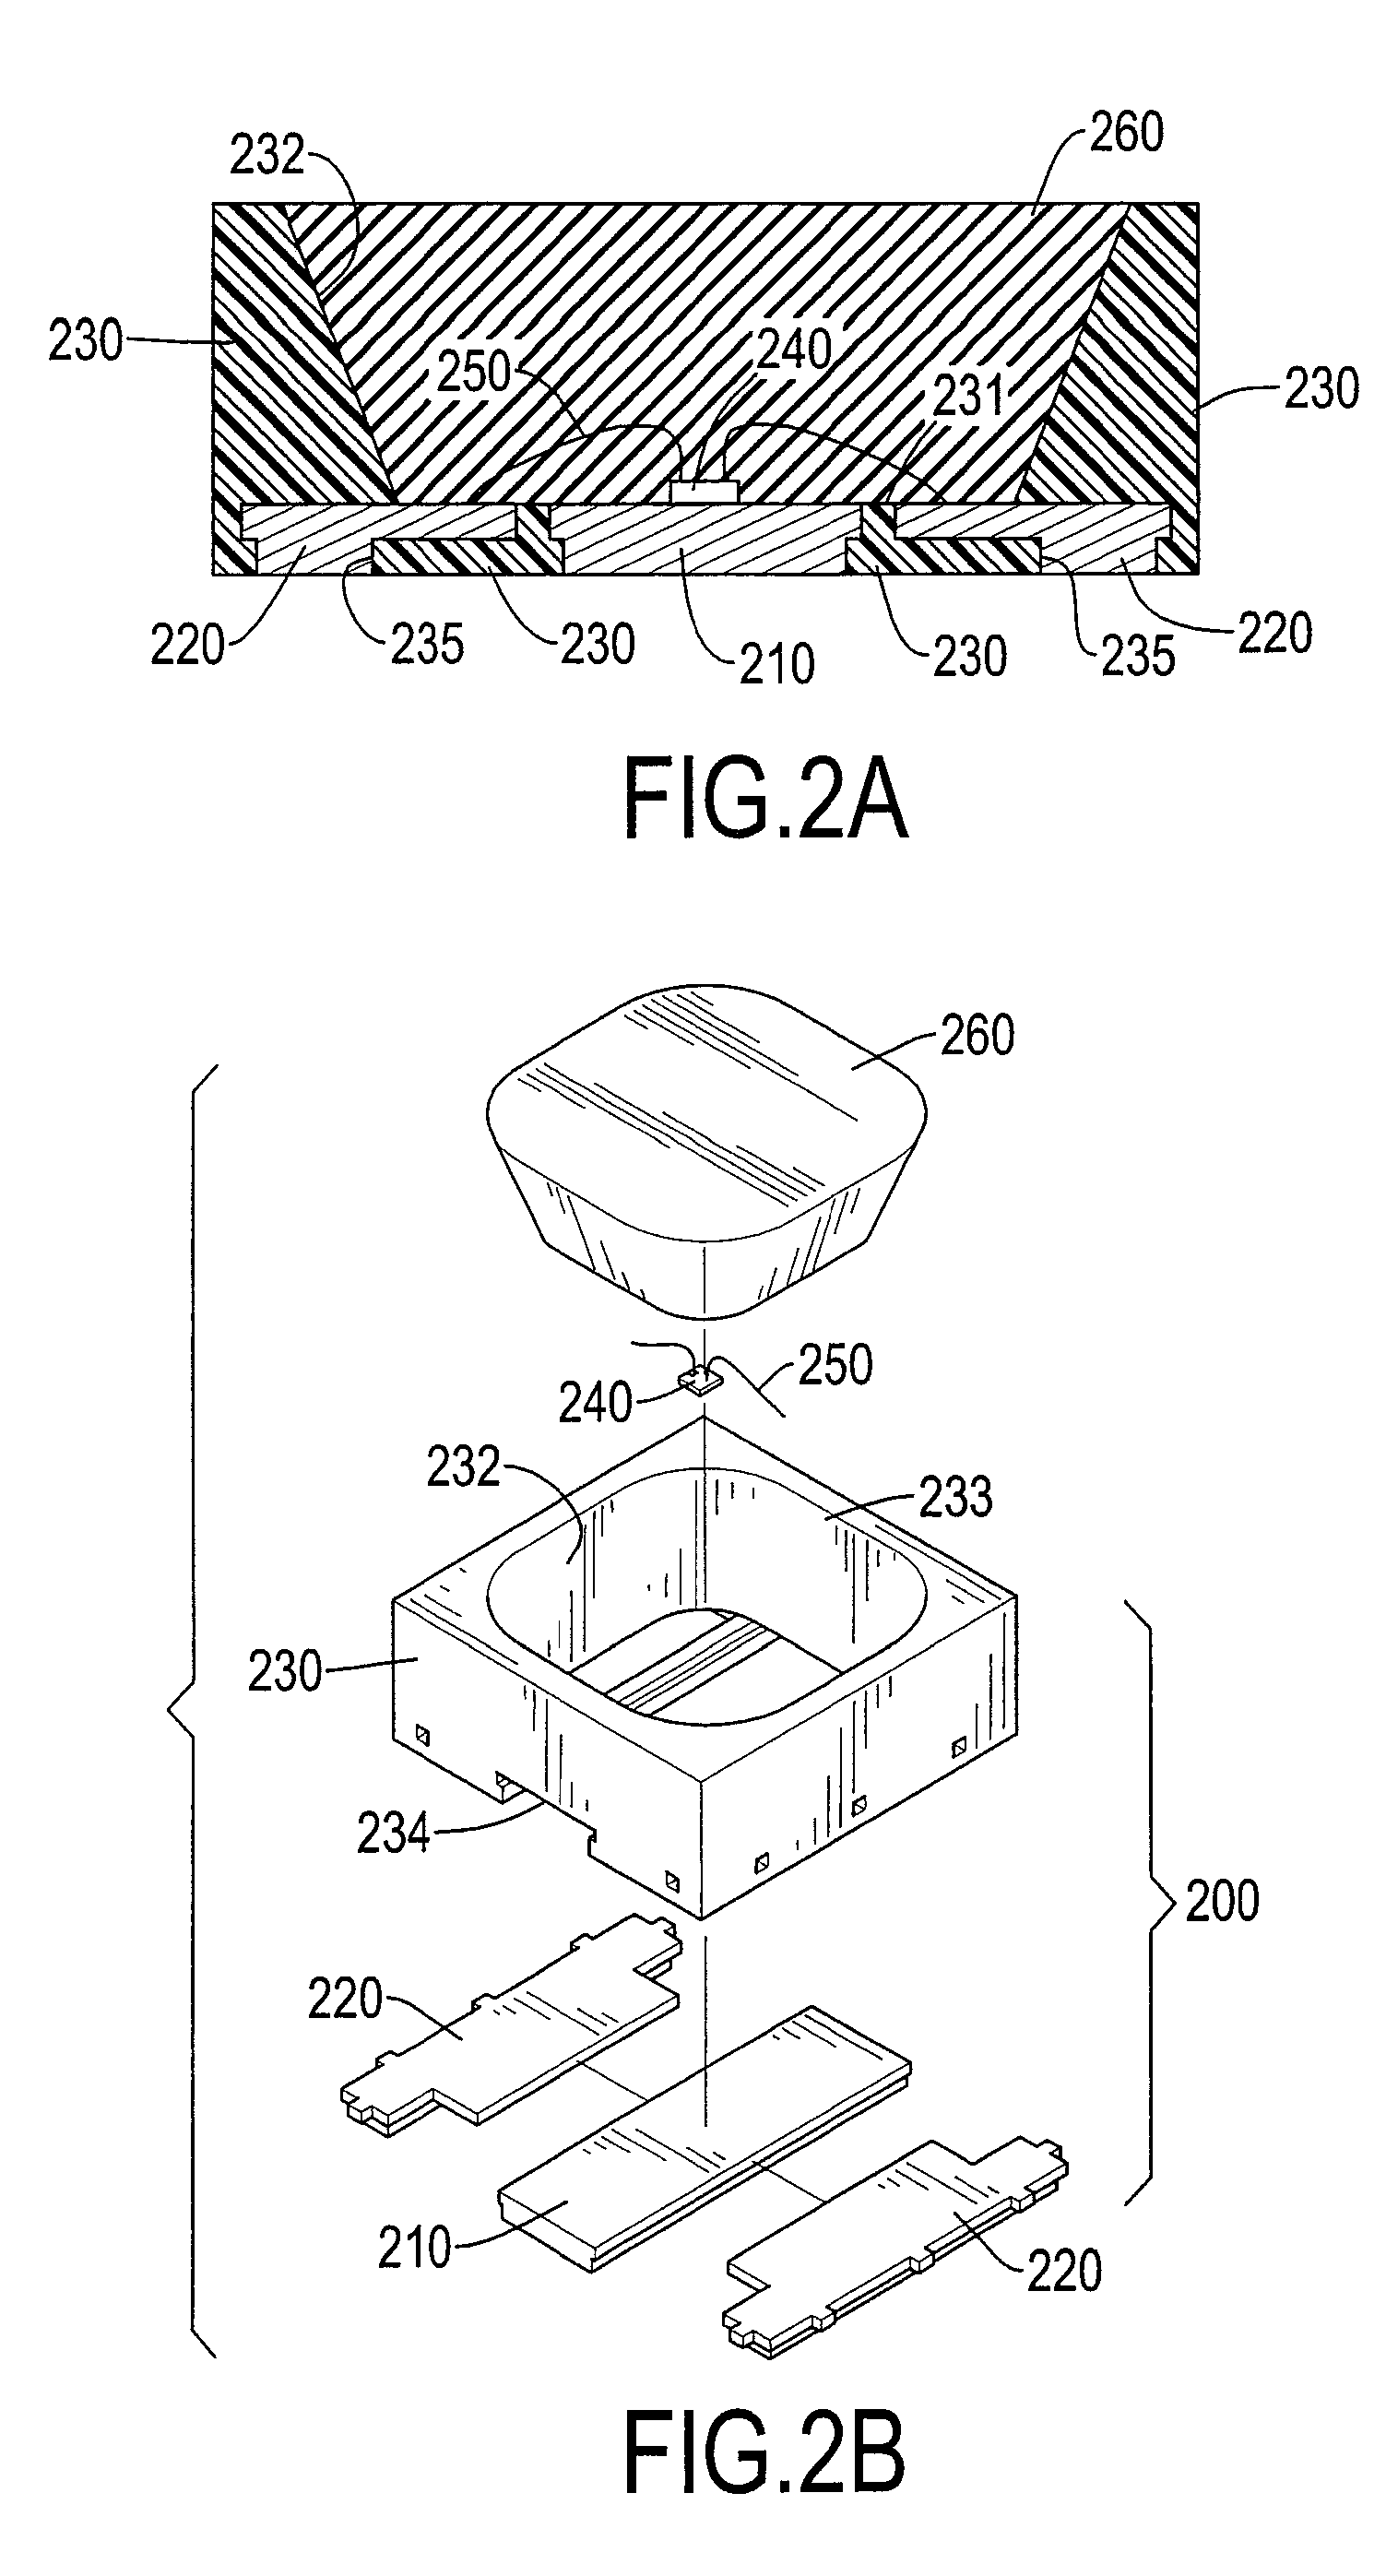 Package for a high-power light emitting diode